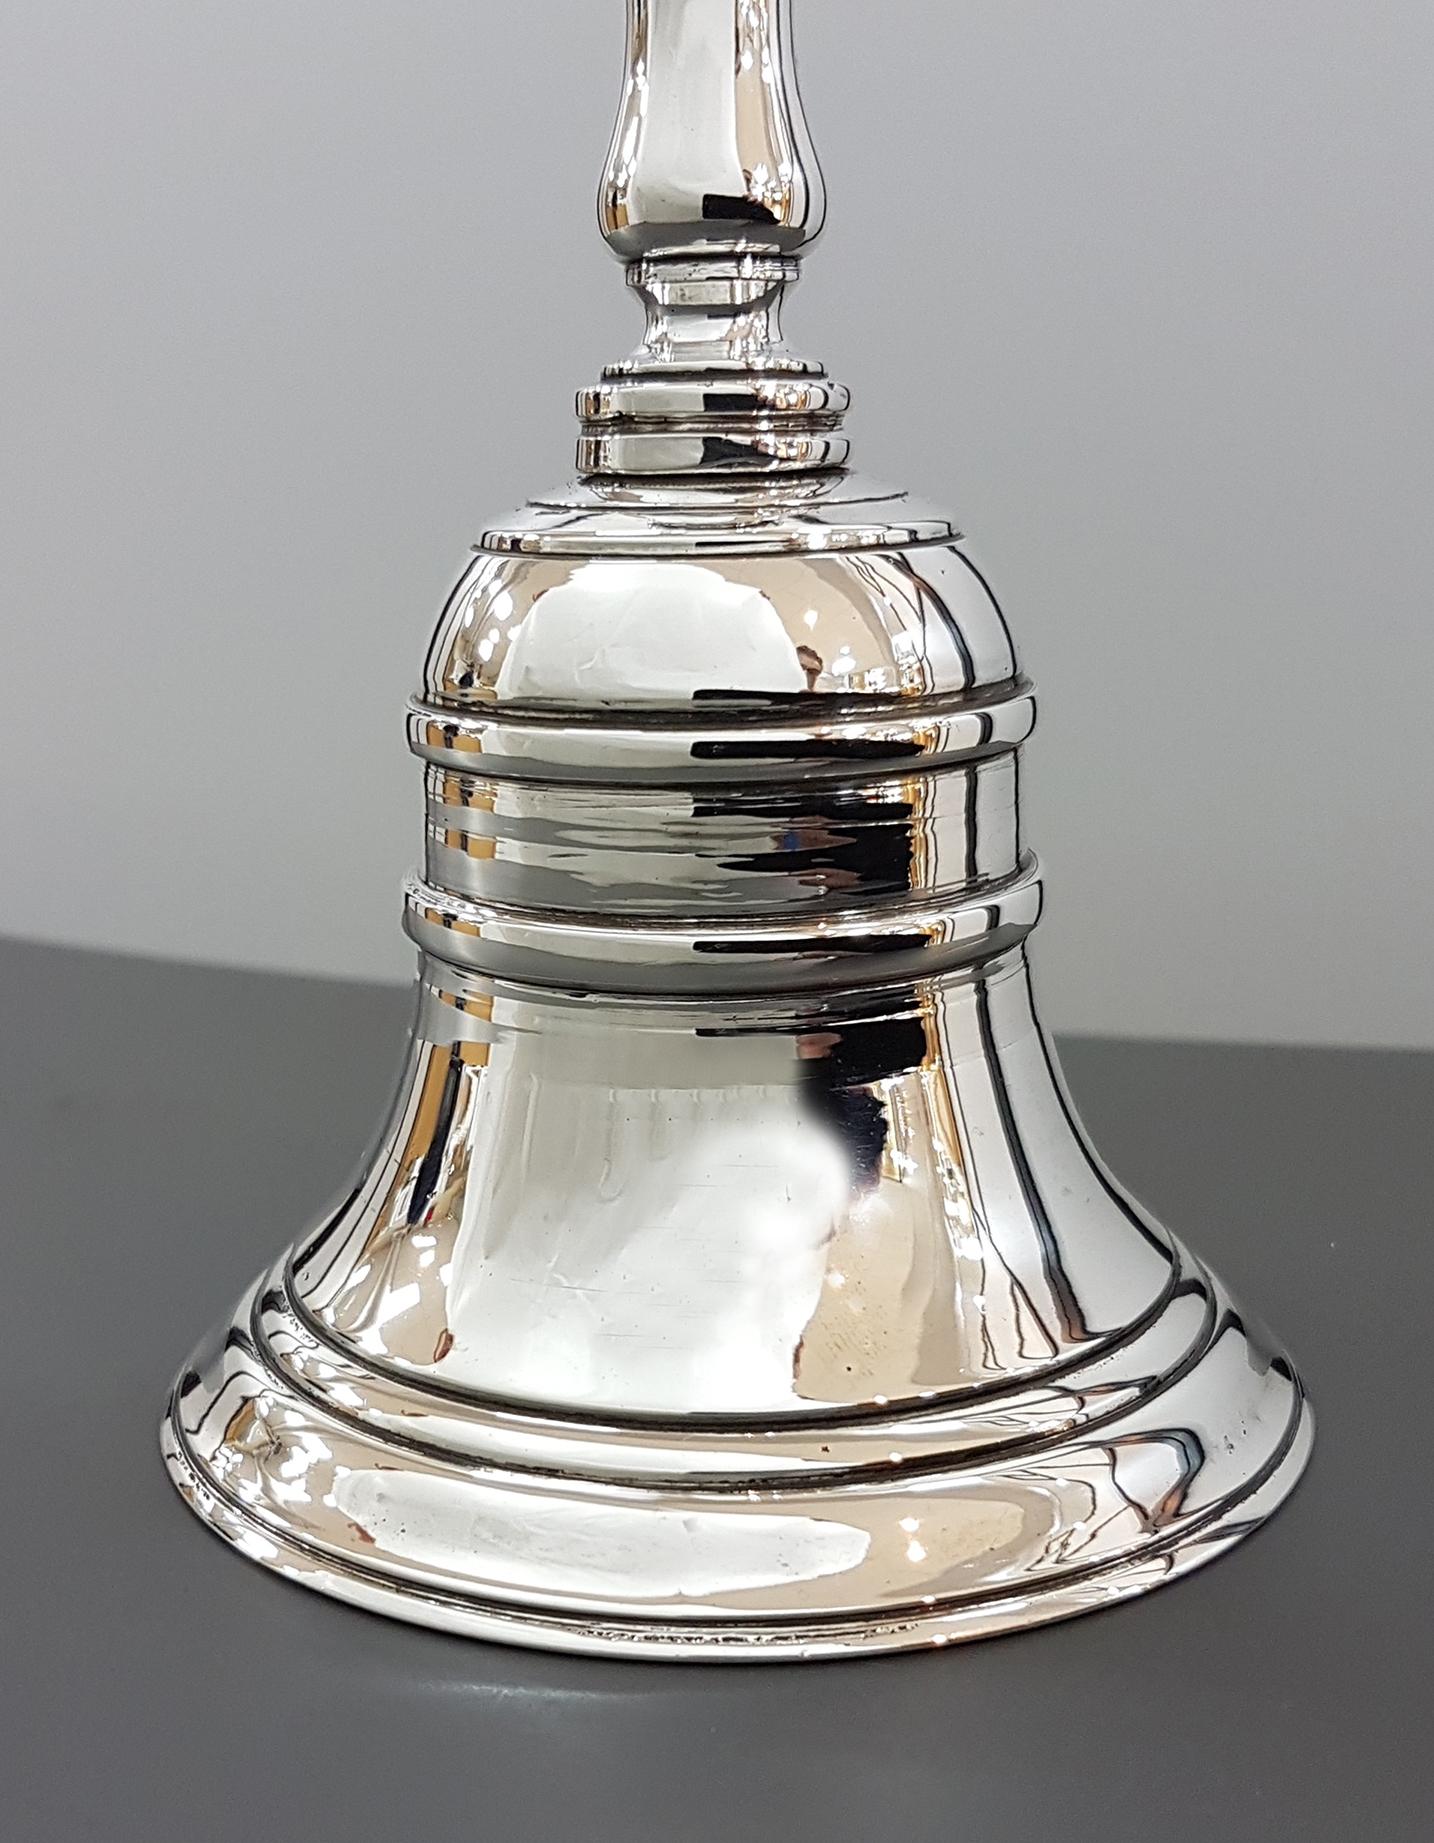 Table bell in sterling silver.
Made of cast and smooth finish with double lines
Shaped handle
466 grams.